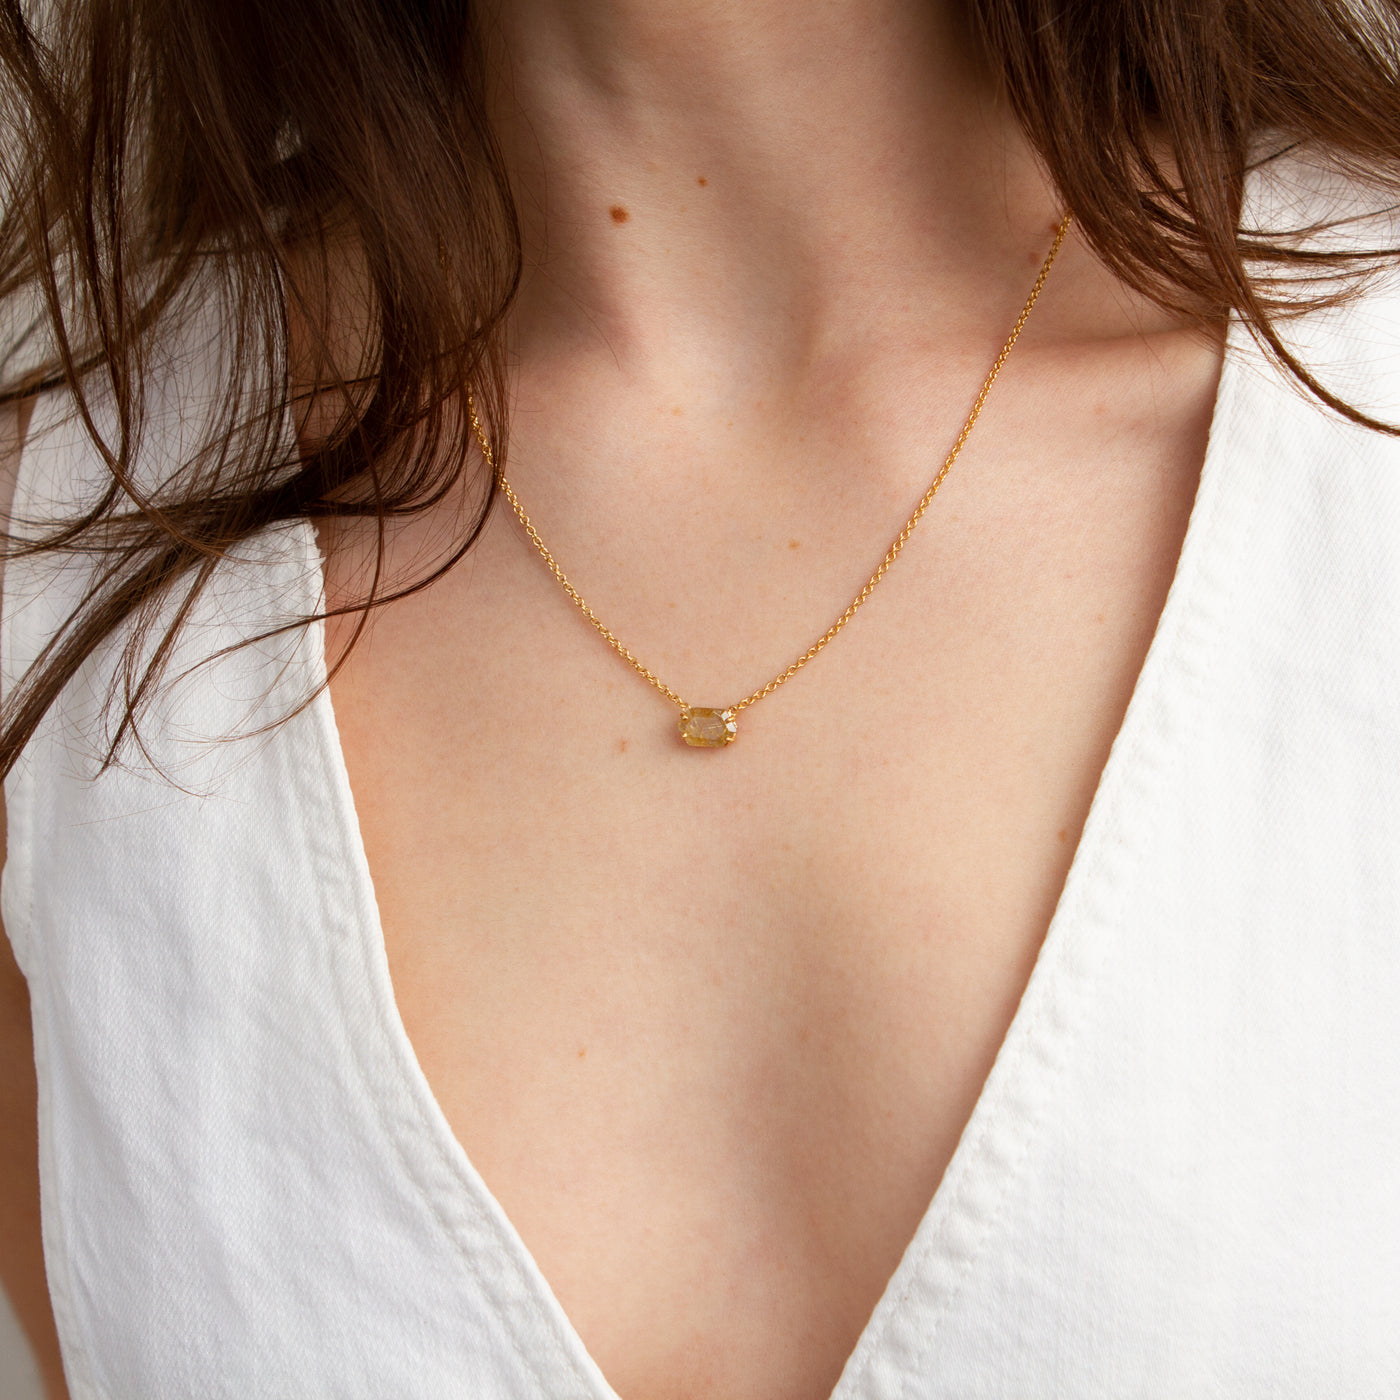 Emerson Rutilated Quartz Necklace in Vermeil modeled on a neck